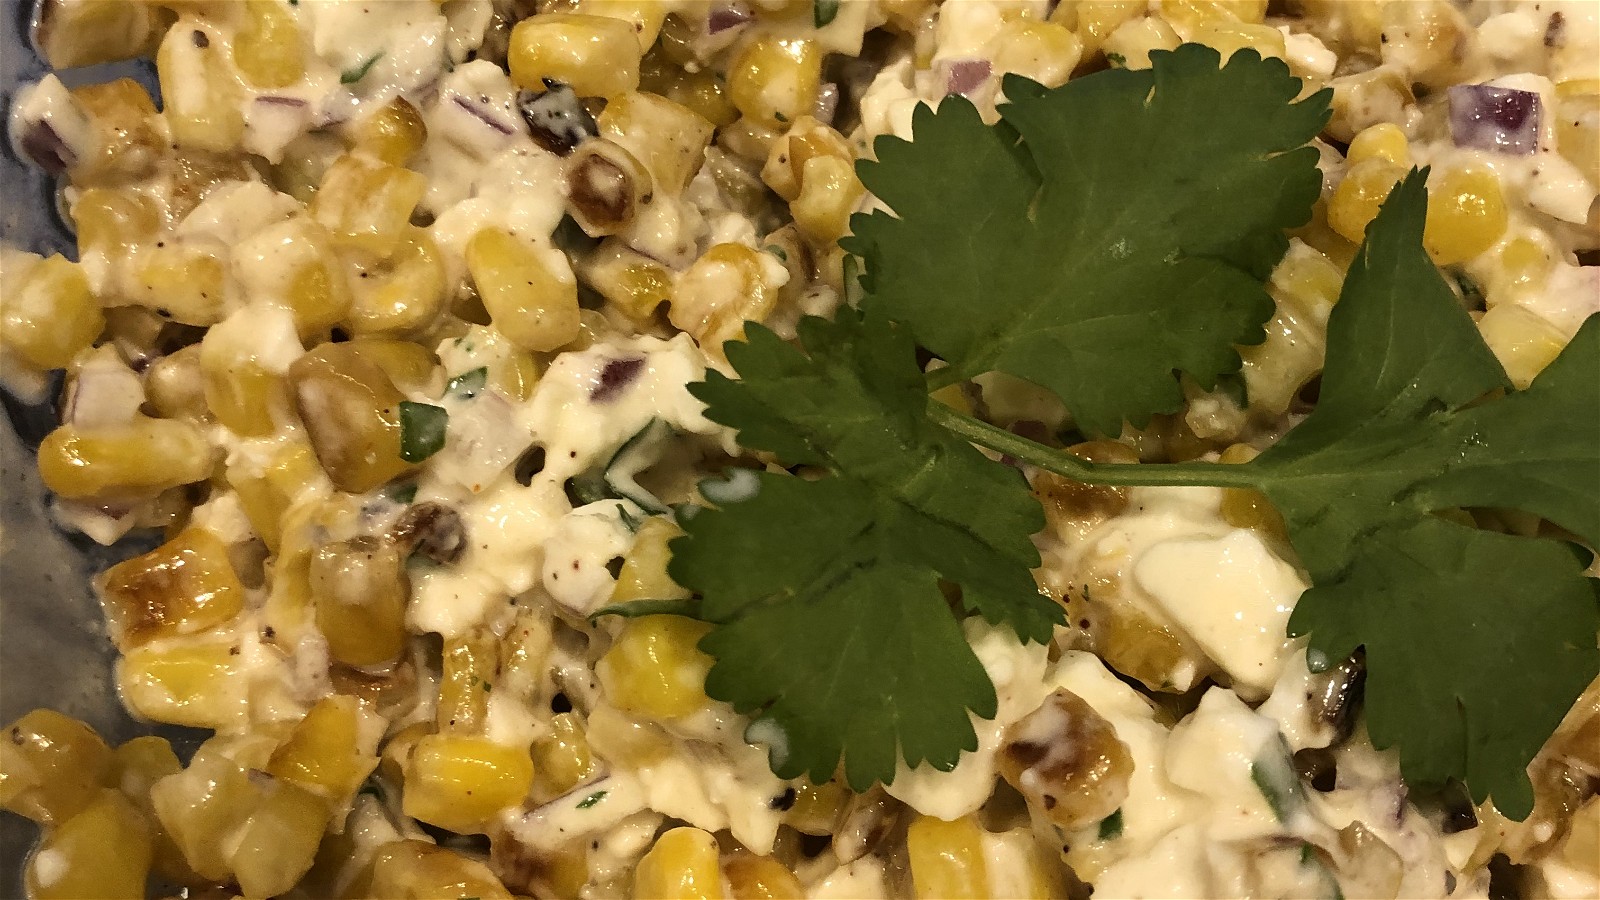 Image of Mexican Street Corn Salad